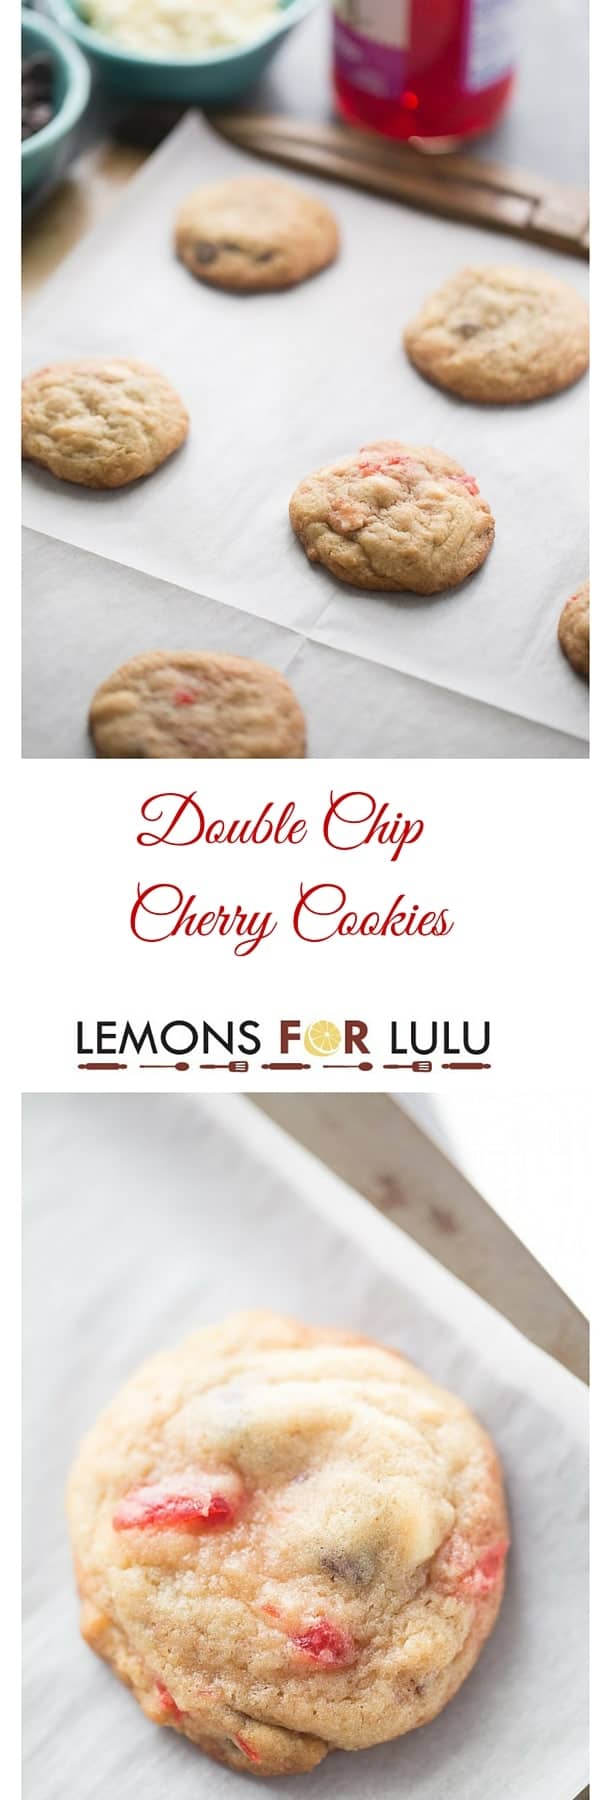 What's better than cookies? Double chocolate chip cookies! Each bite of these cookies is filled with creamy white chocolate and rich semi-sweet chocolate! Maraschino cherries make this cookie recipe taste extra special and fun! lemonsforlulu.com